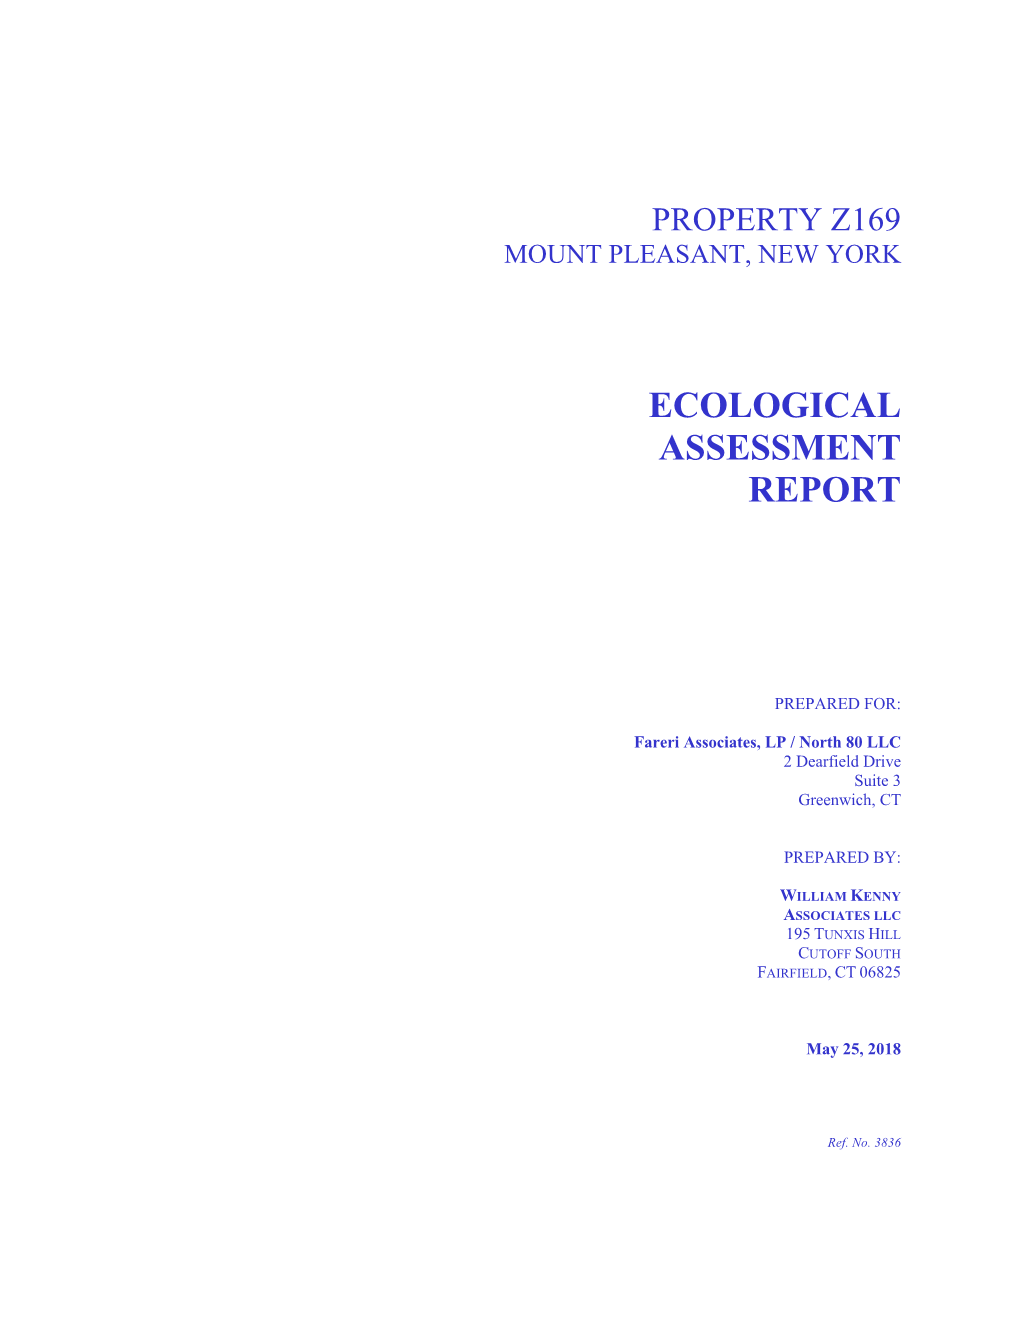 Ecological Assessment Report